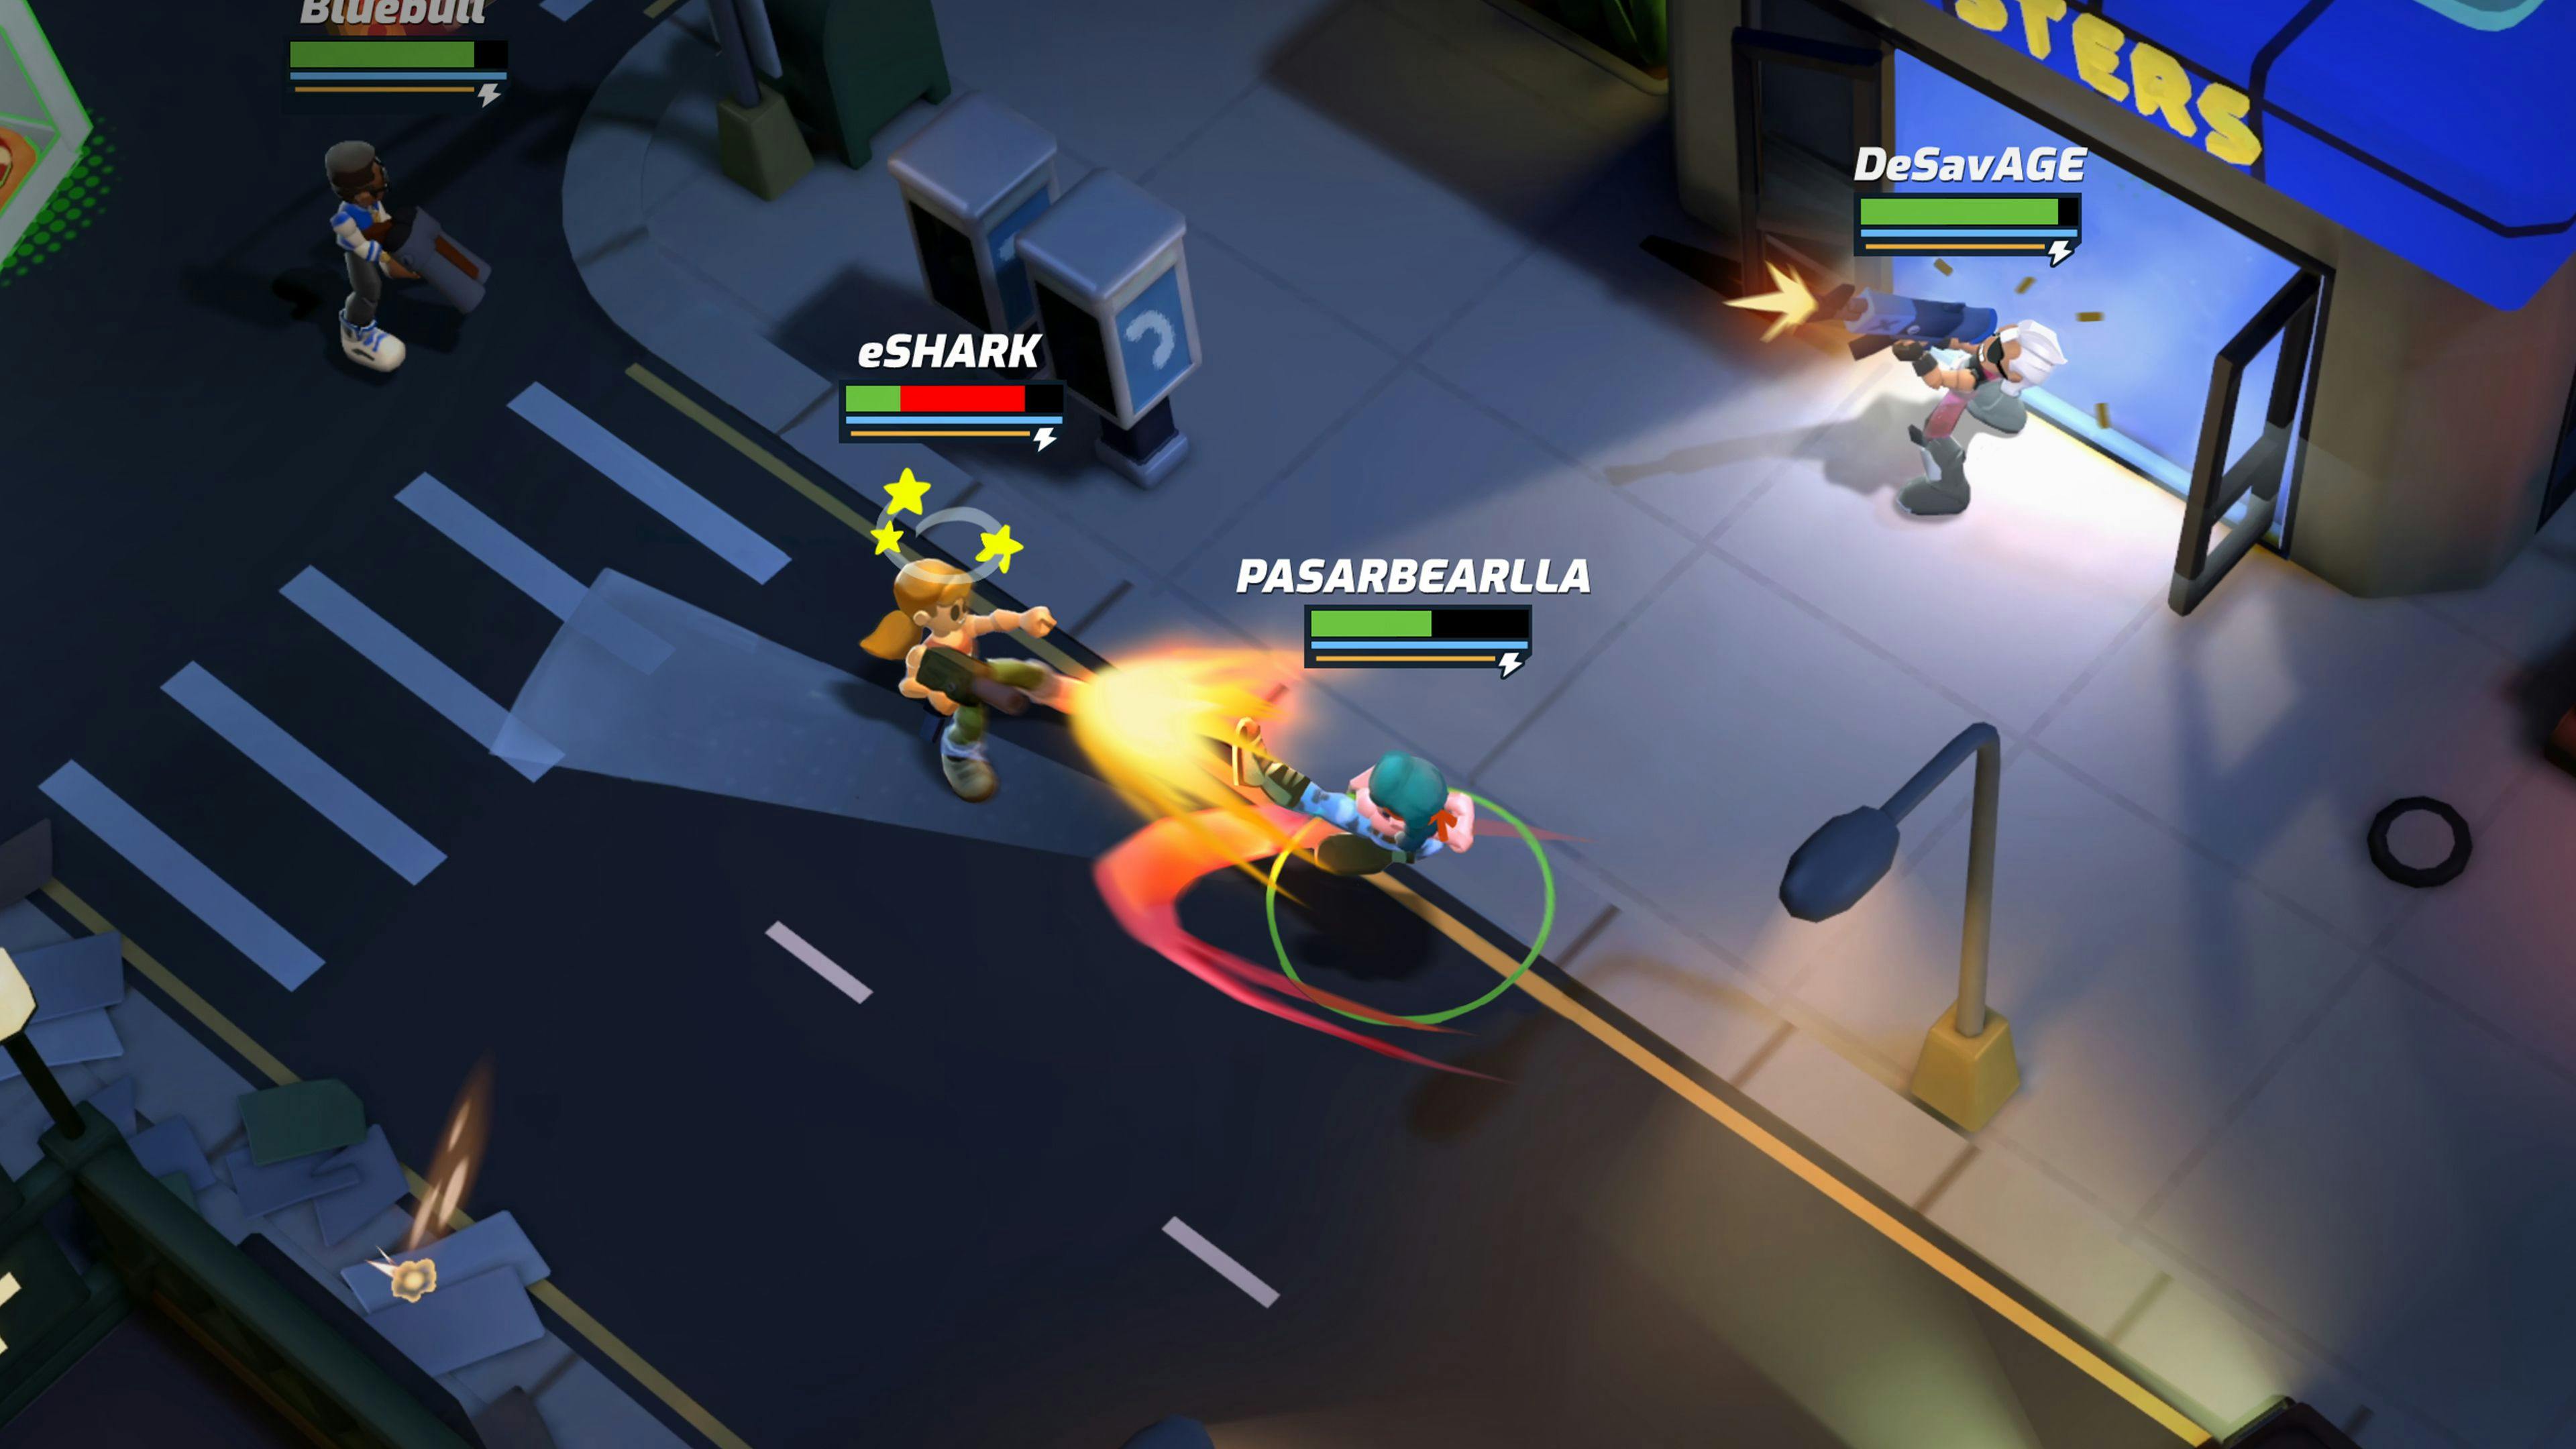 Avocado DAO participates in Early Access of Mighty Action Heroes